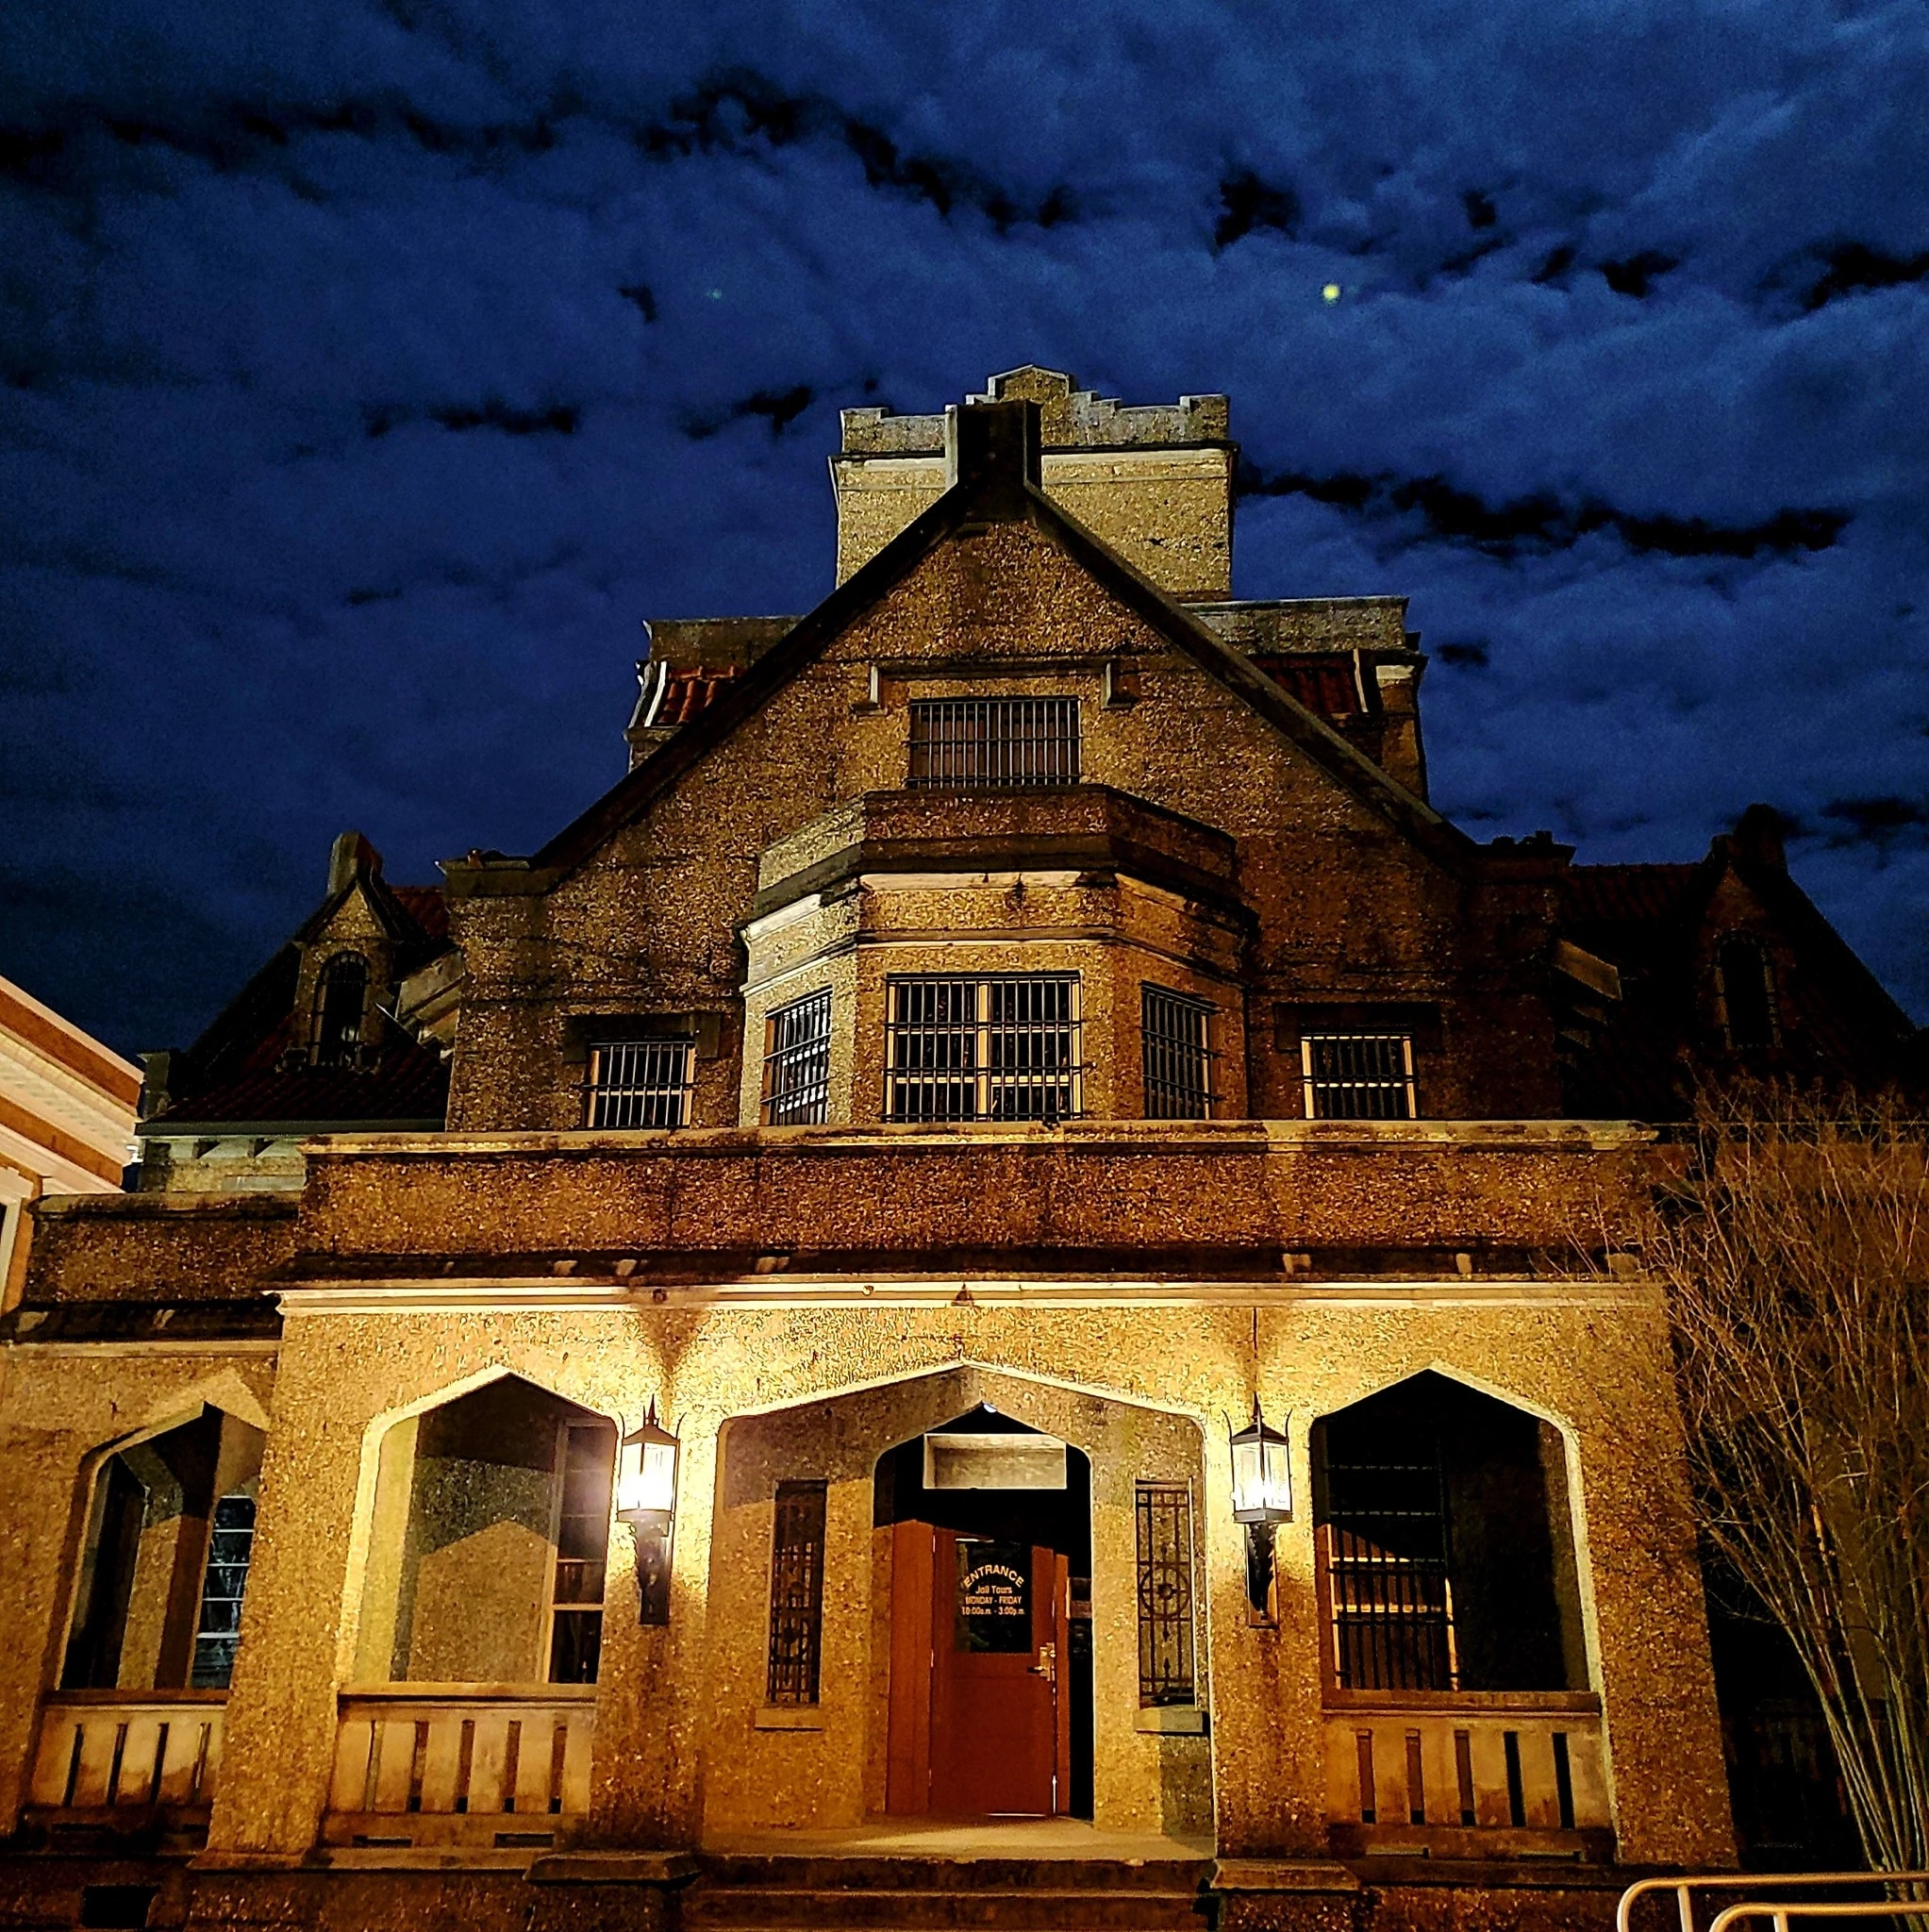 Louisiana's Best Haunted Houses According to Google Reviews